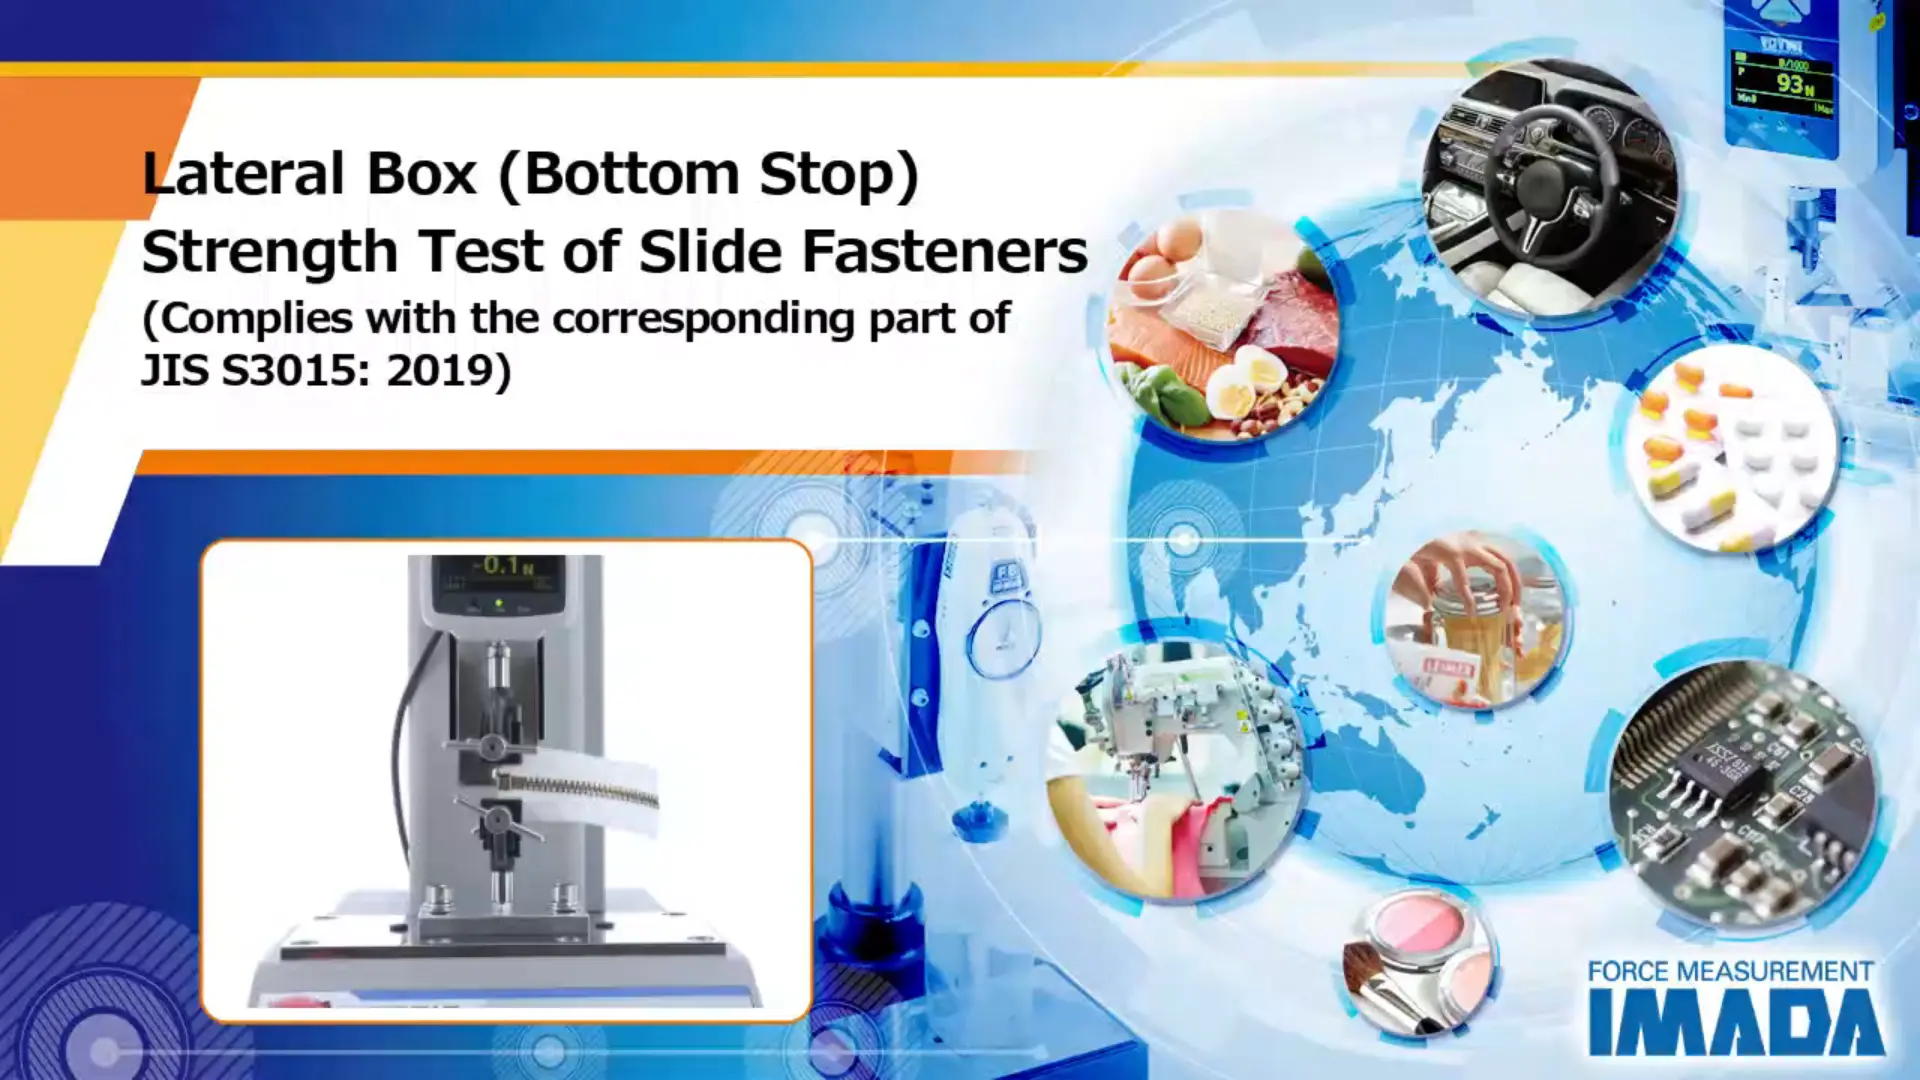 Lateral Box (Bottom Stop) Strength Test of Slide Fasteners (Complies with the corresponding part of JIS S 3015: 2019)